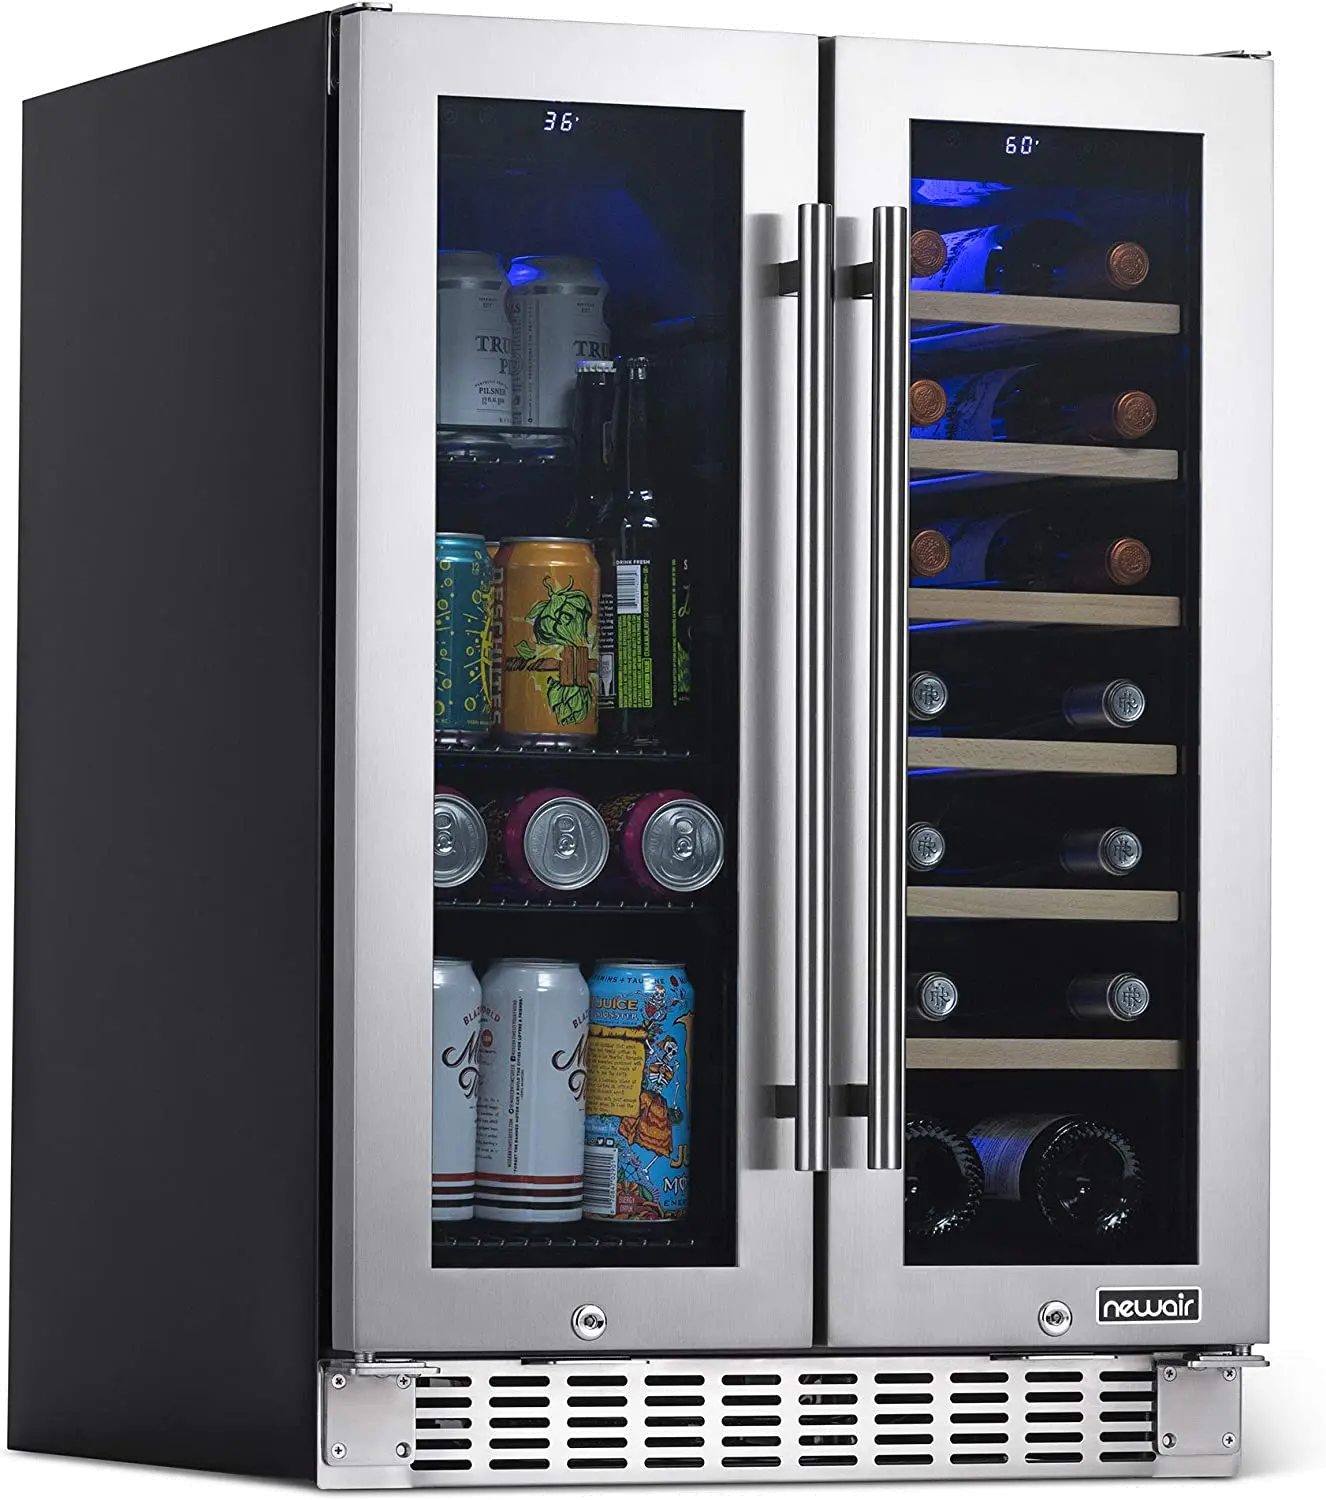 NWB080SS00 New Air 24 Premium Built-in Dual Zone Wine and Bev sku NWB080SS00